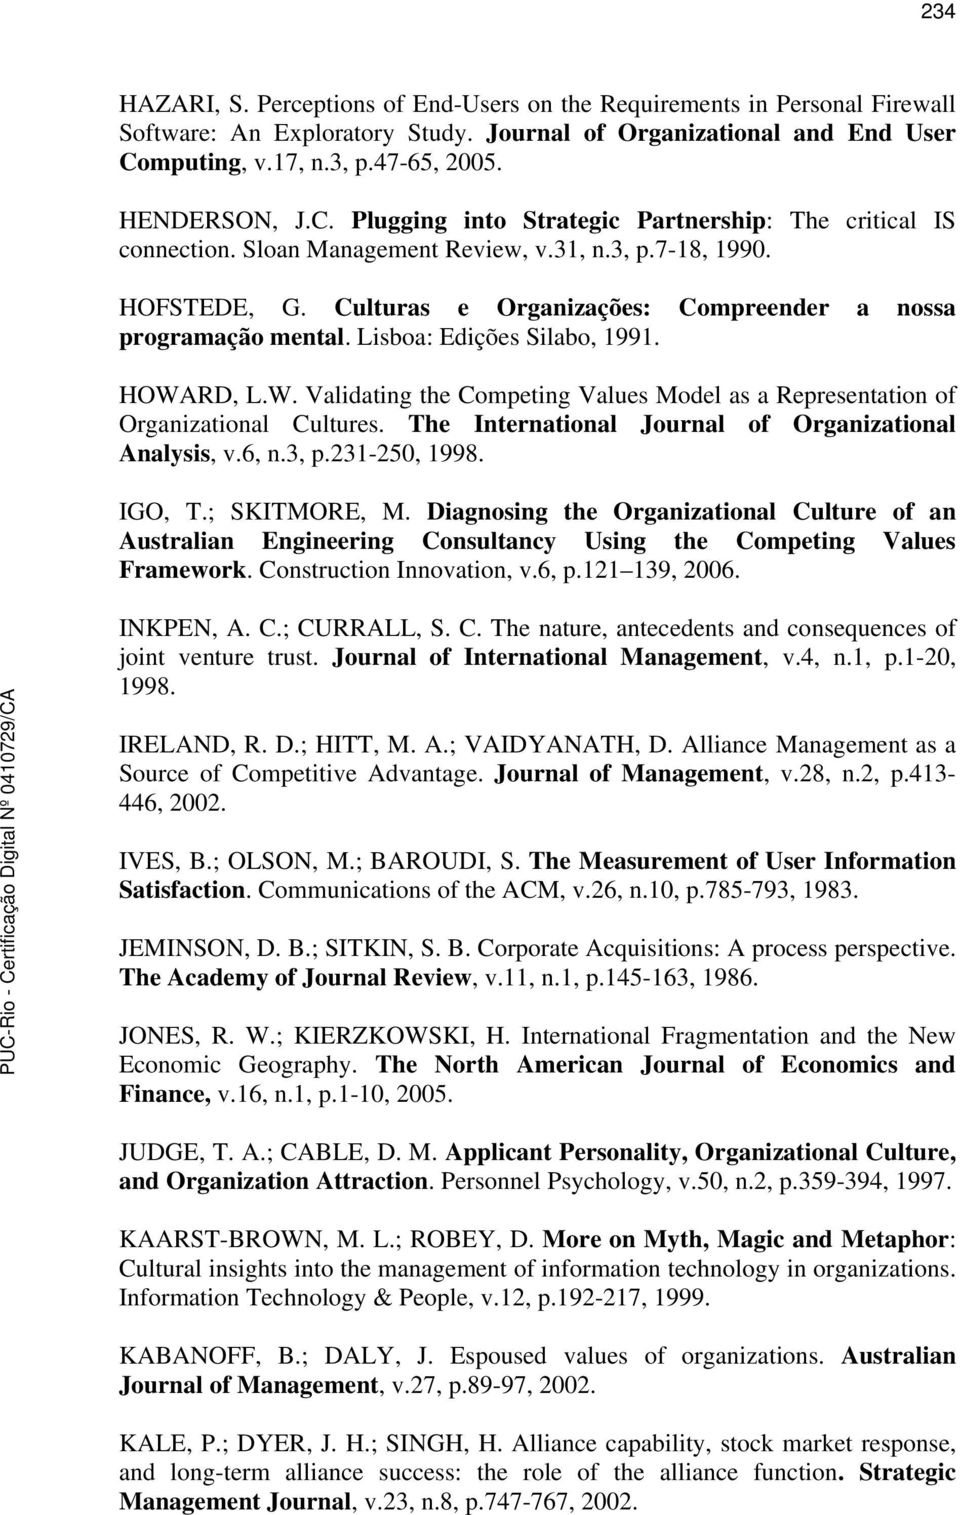 Lisboa: Edições Silabo, 1991. HOWARD, L.W. Validating the Competing Values Model as a Representation of Organizational Cultures. The International Journal of Organizational Analysis, v.6, n.3, p.